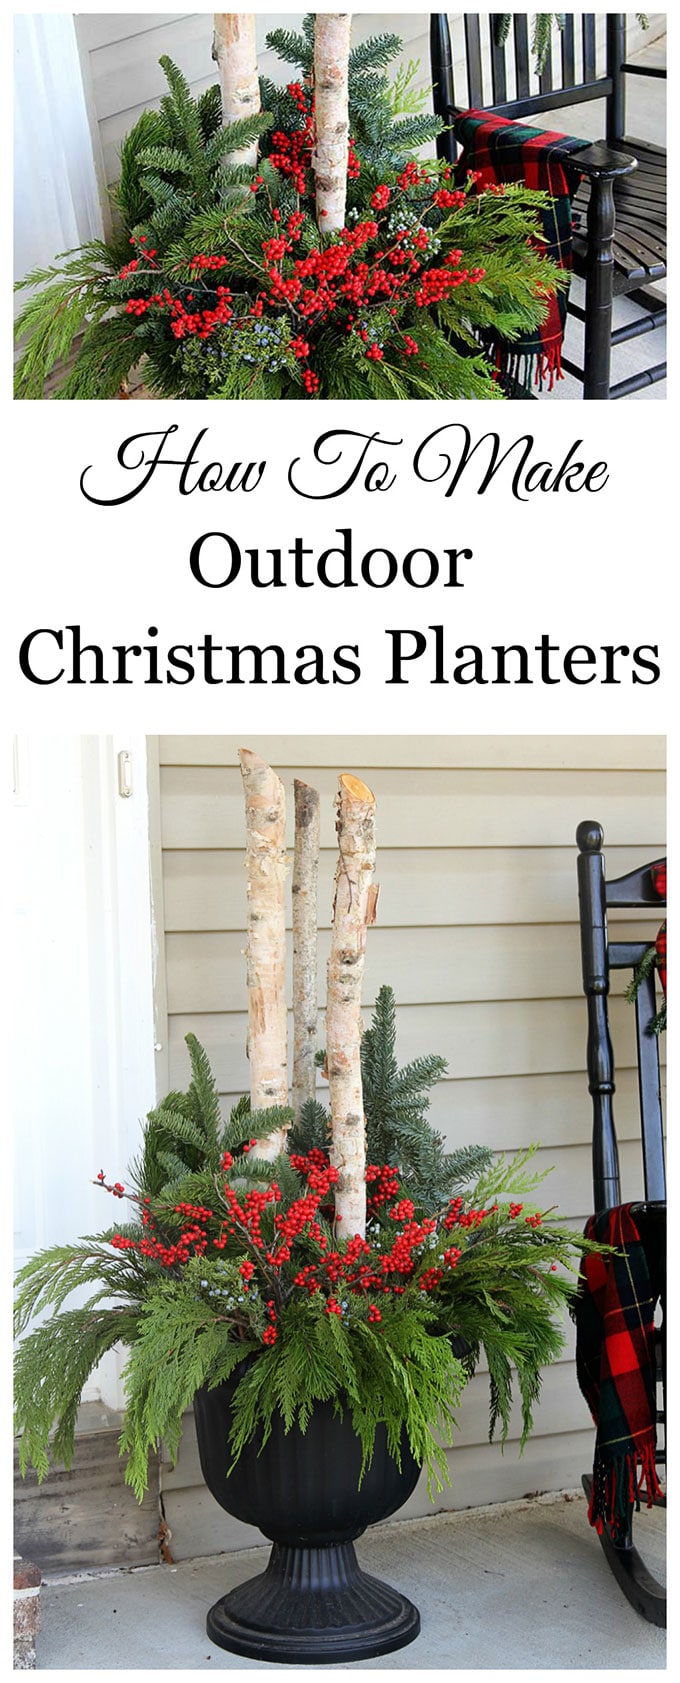 Learn how to make these beautiful outdoor Christmas planters made with Birch branches and Winterberry. A quick and easy accent for your holiday porch decor. #ChristmasDecor #porch #porchdecor #containergardening #winterdecor #gardeningideas